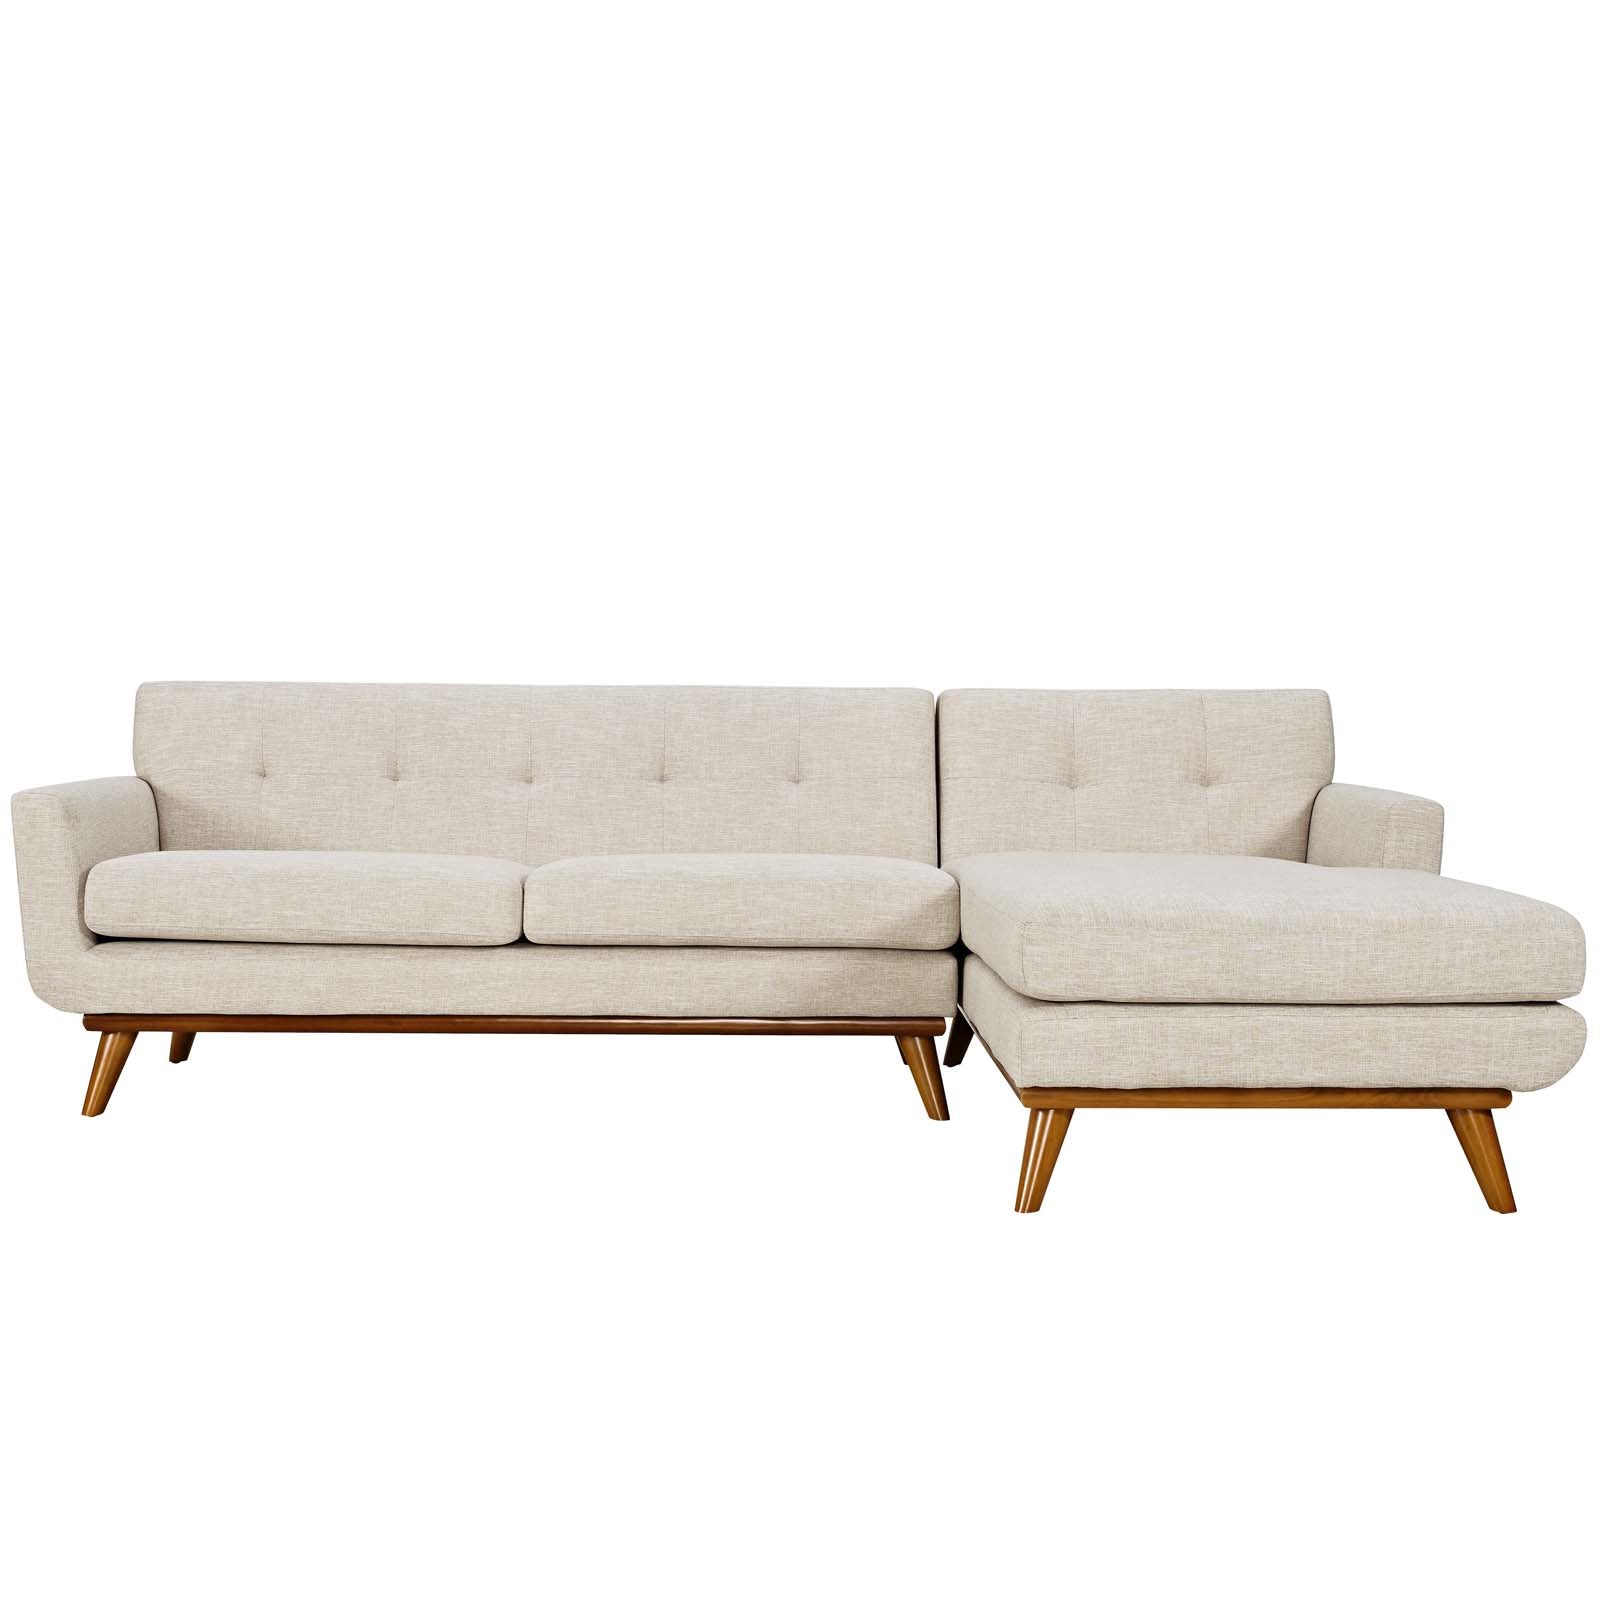 Modway Sectional Sofas - Engage Right-Facing Sectional Sofa Beige